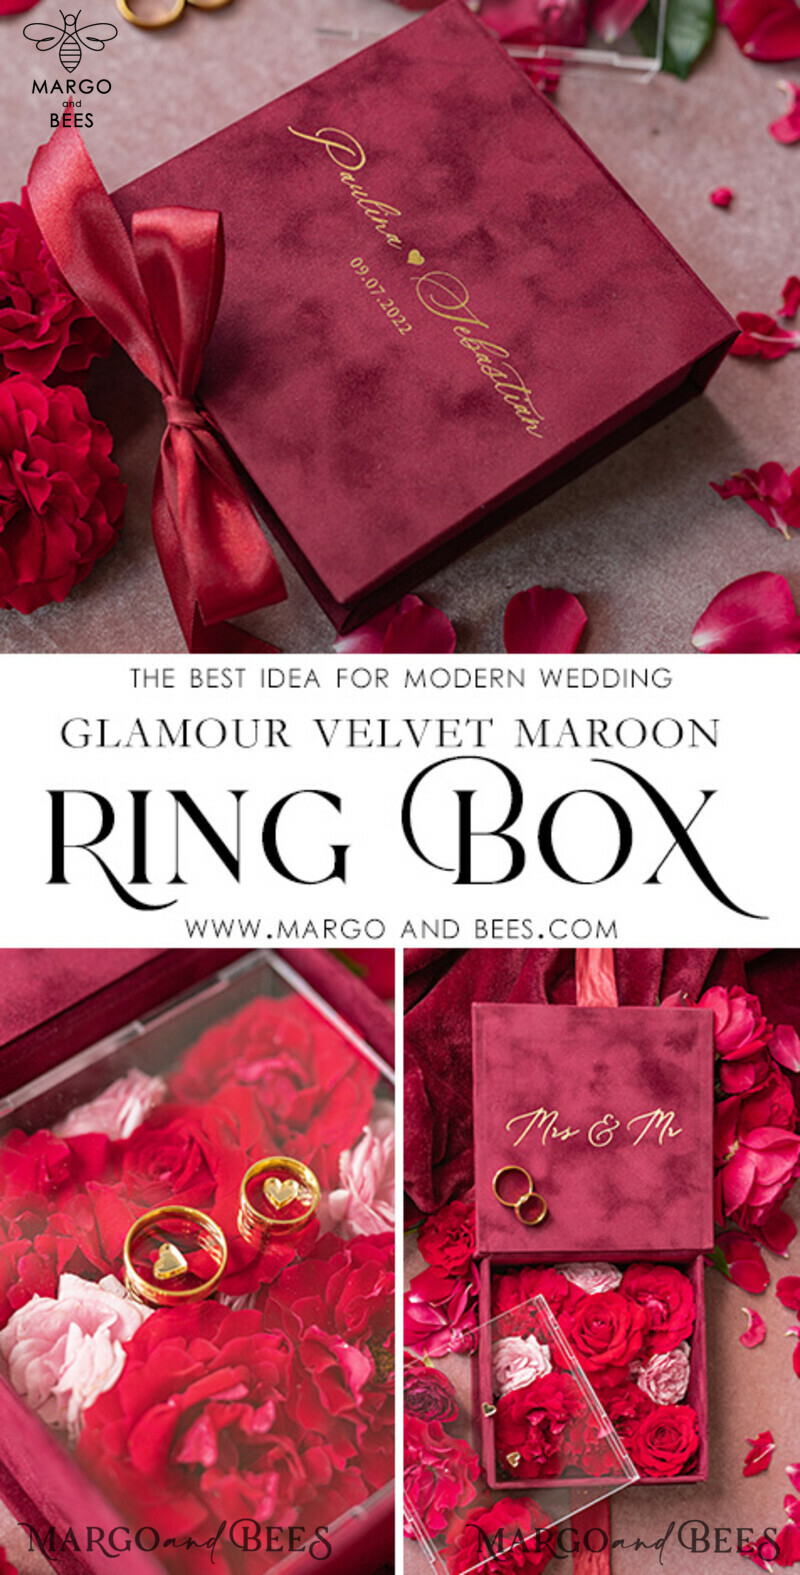 Exquisite Handmade Velvet Wedding Rings Box in Glamorous Maroon and Gold for a Luxurious and Elegant Touch-3